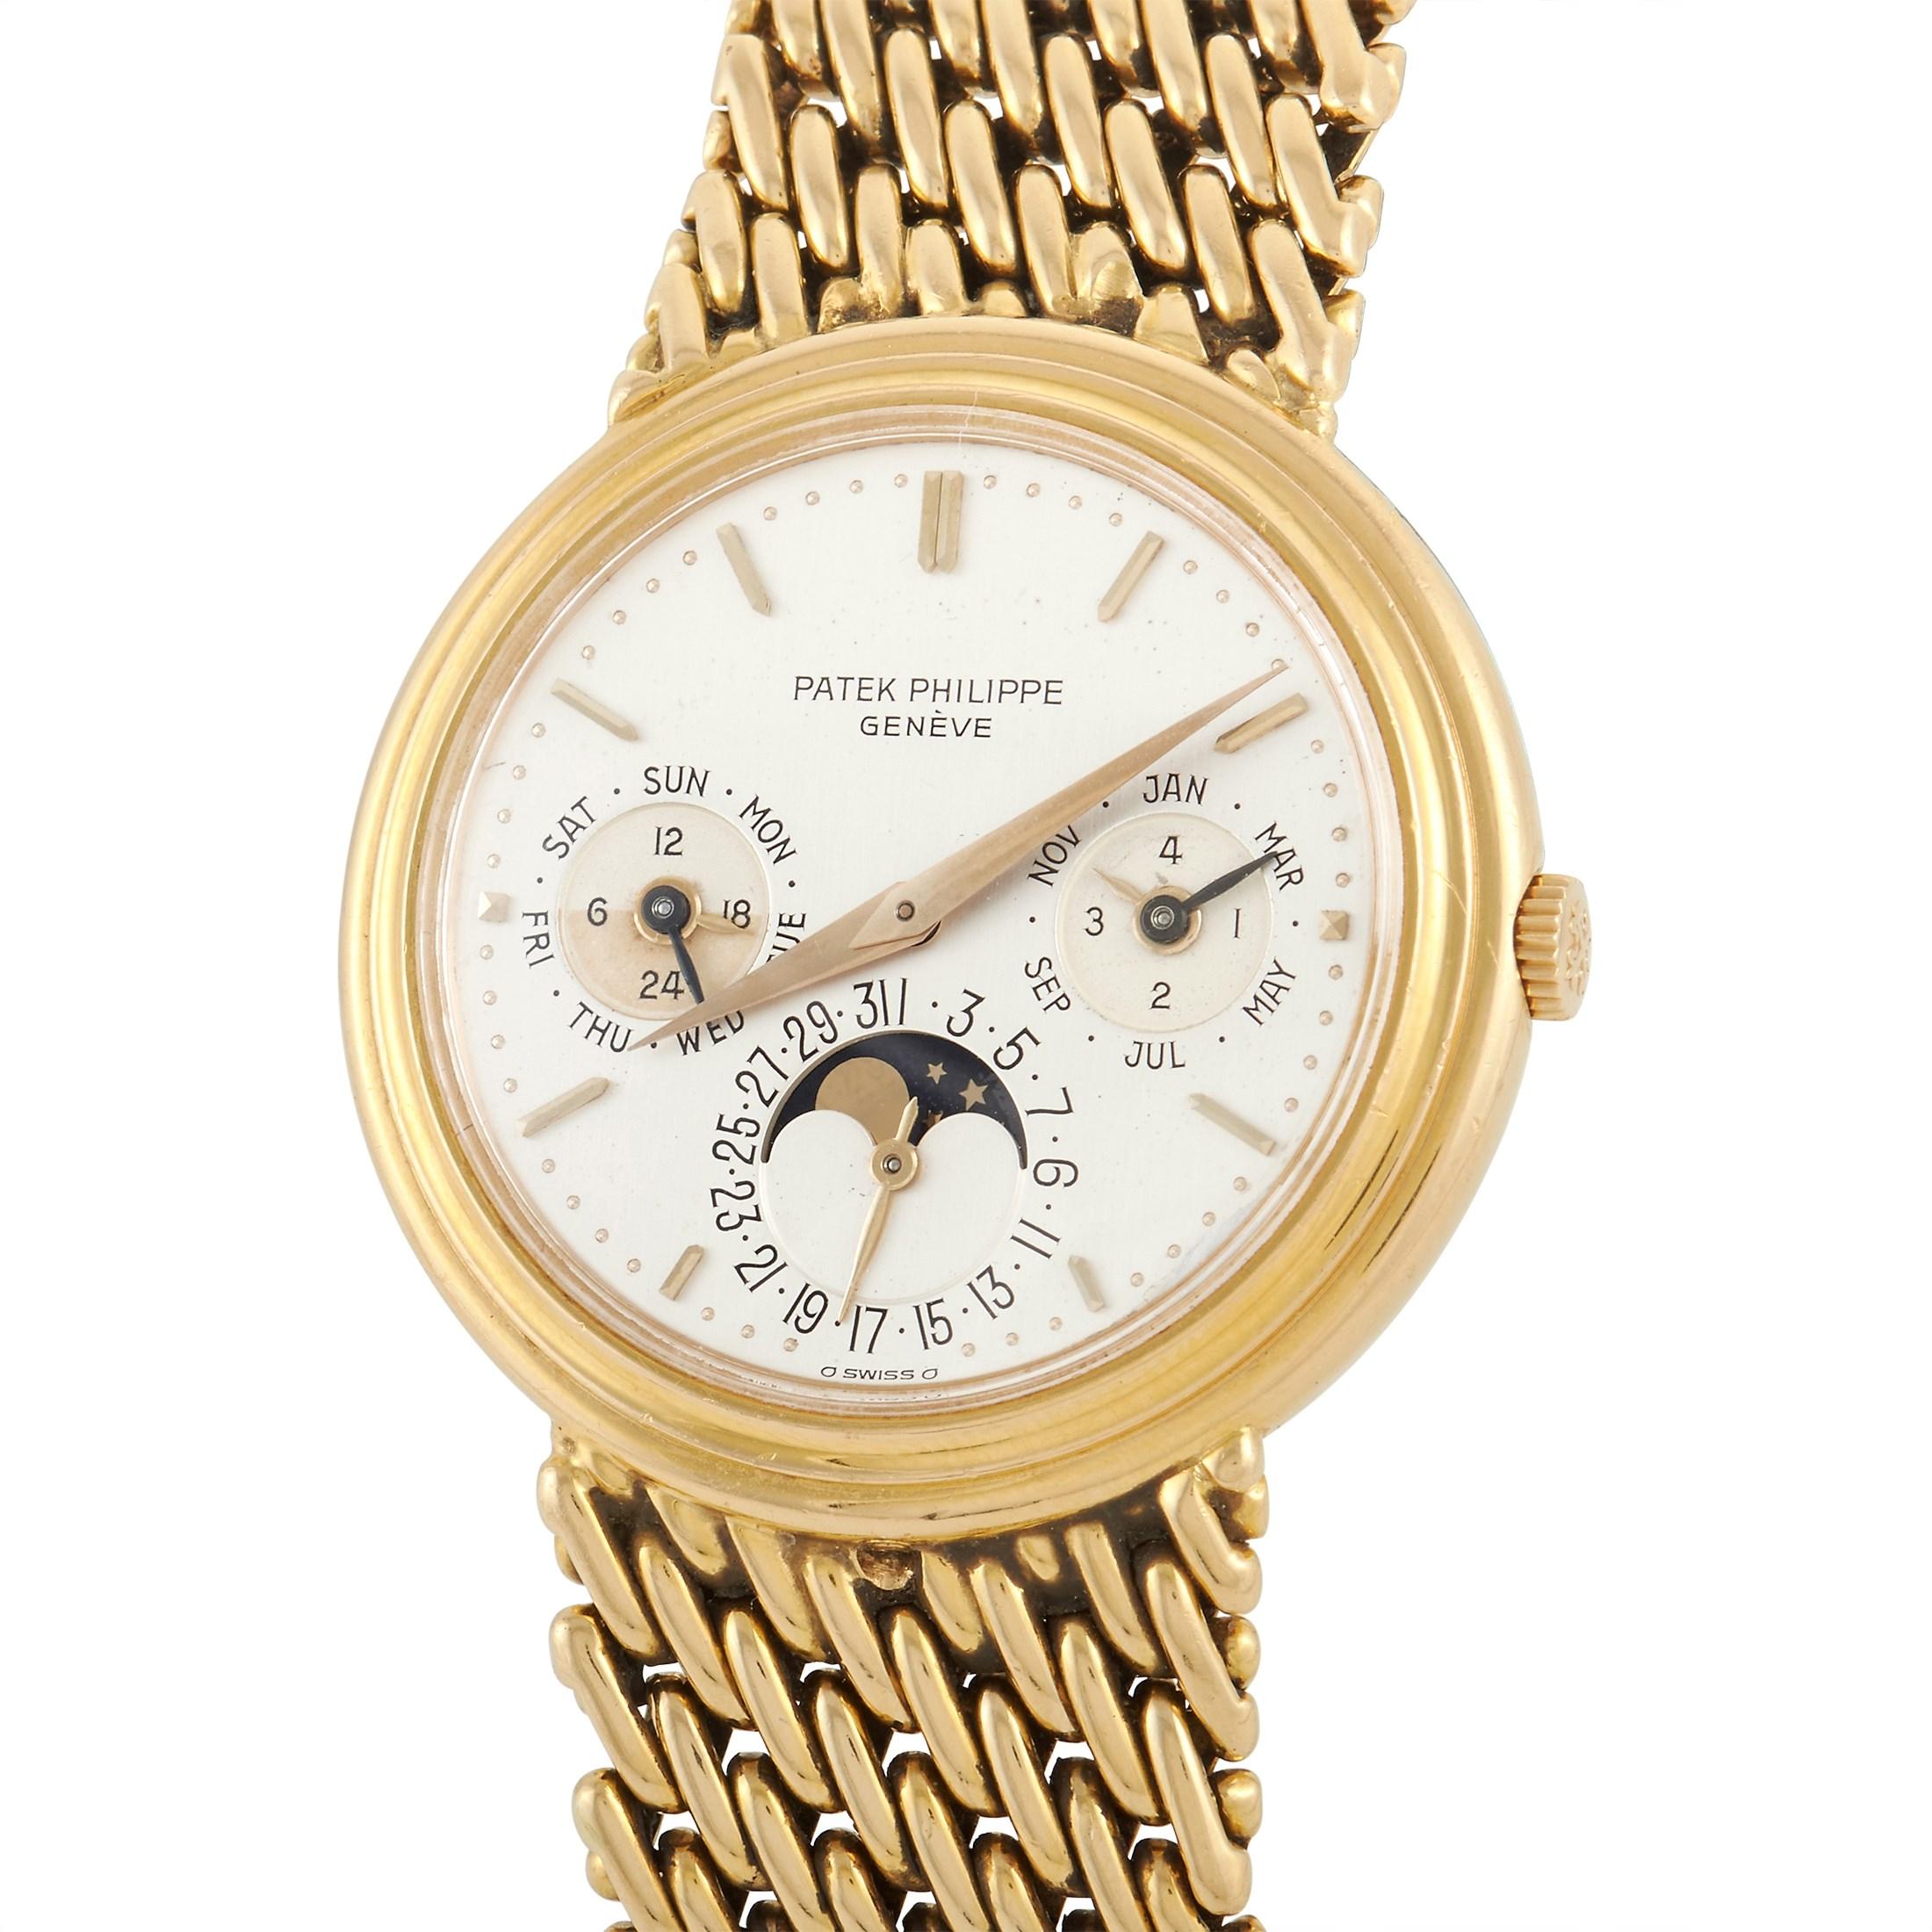 Displaying a perfect balance of elegance and practicality, the Patek Philippe Perpetual Calendar Moon Phase Watch 3945/IJ is a timepiece you'll forever adore. It features an 18K yellow gold case with woven-like bracelet of the same material. A cream